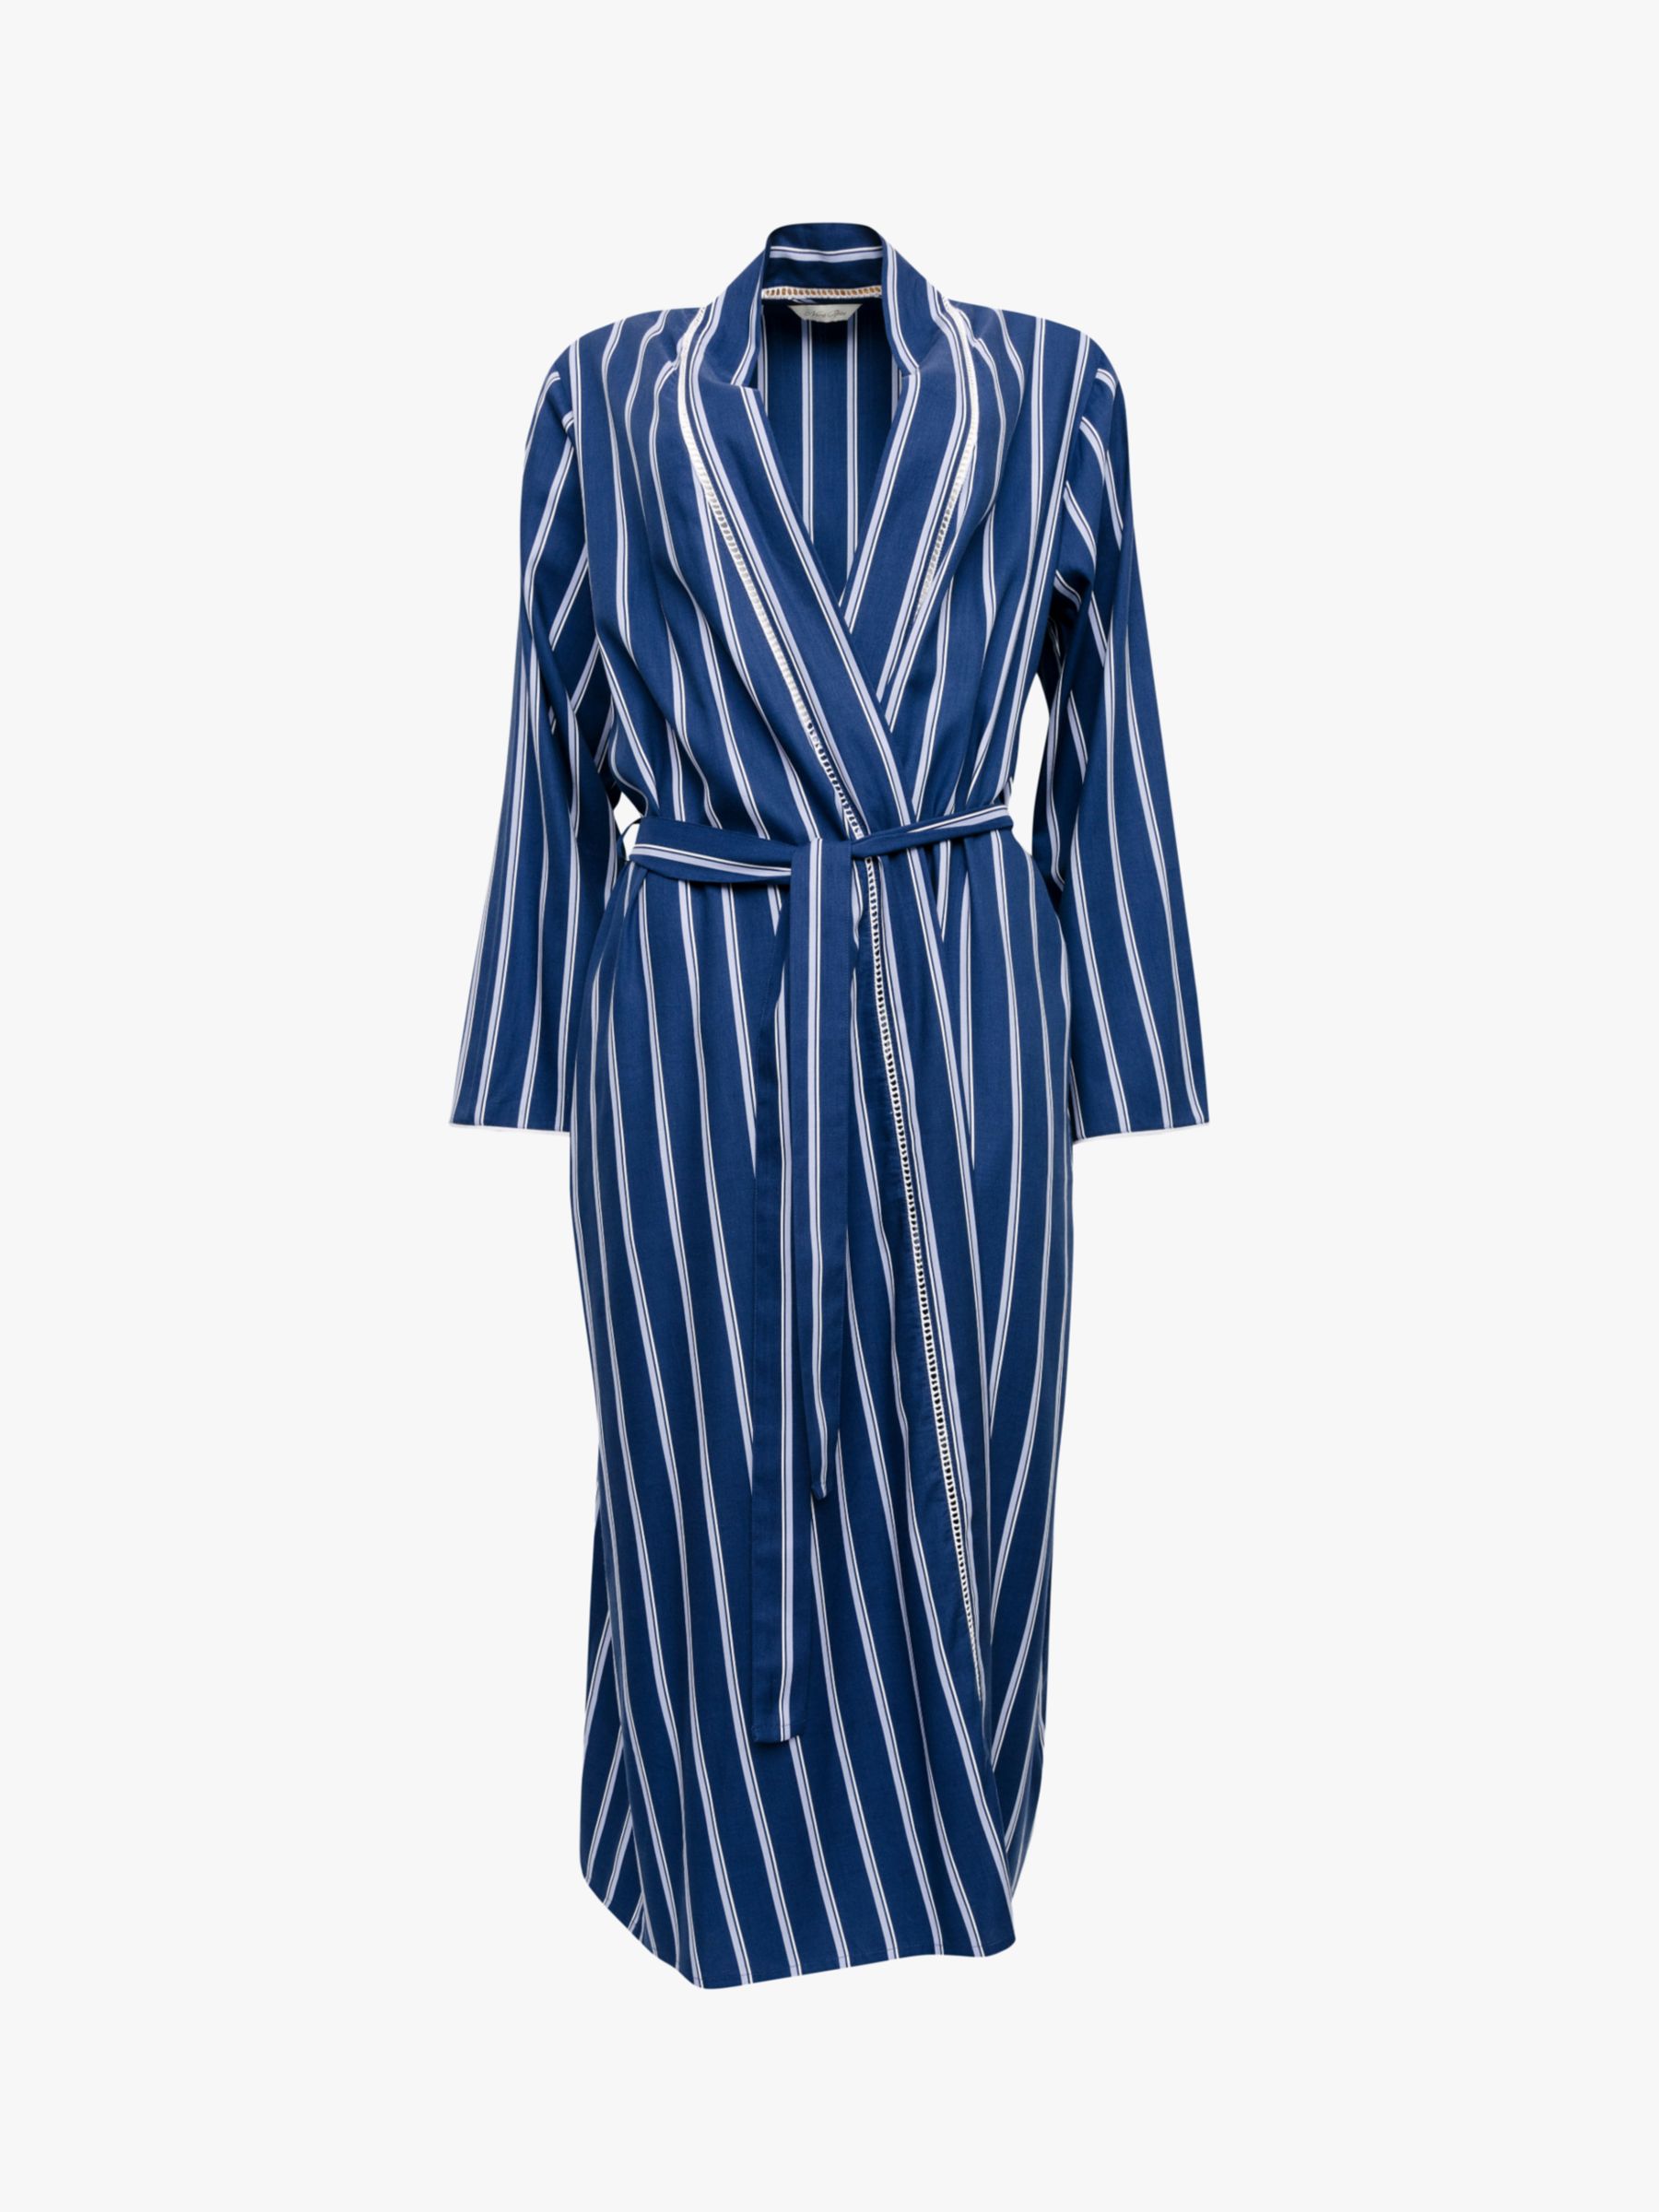 Nora Rose by Cyberjammies Evette Striped Long Dressing Gown, Blue at ...